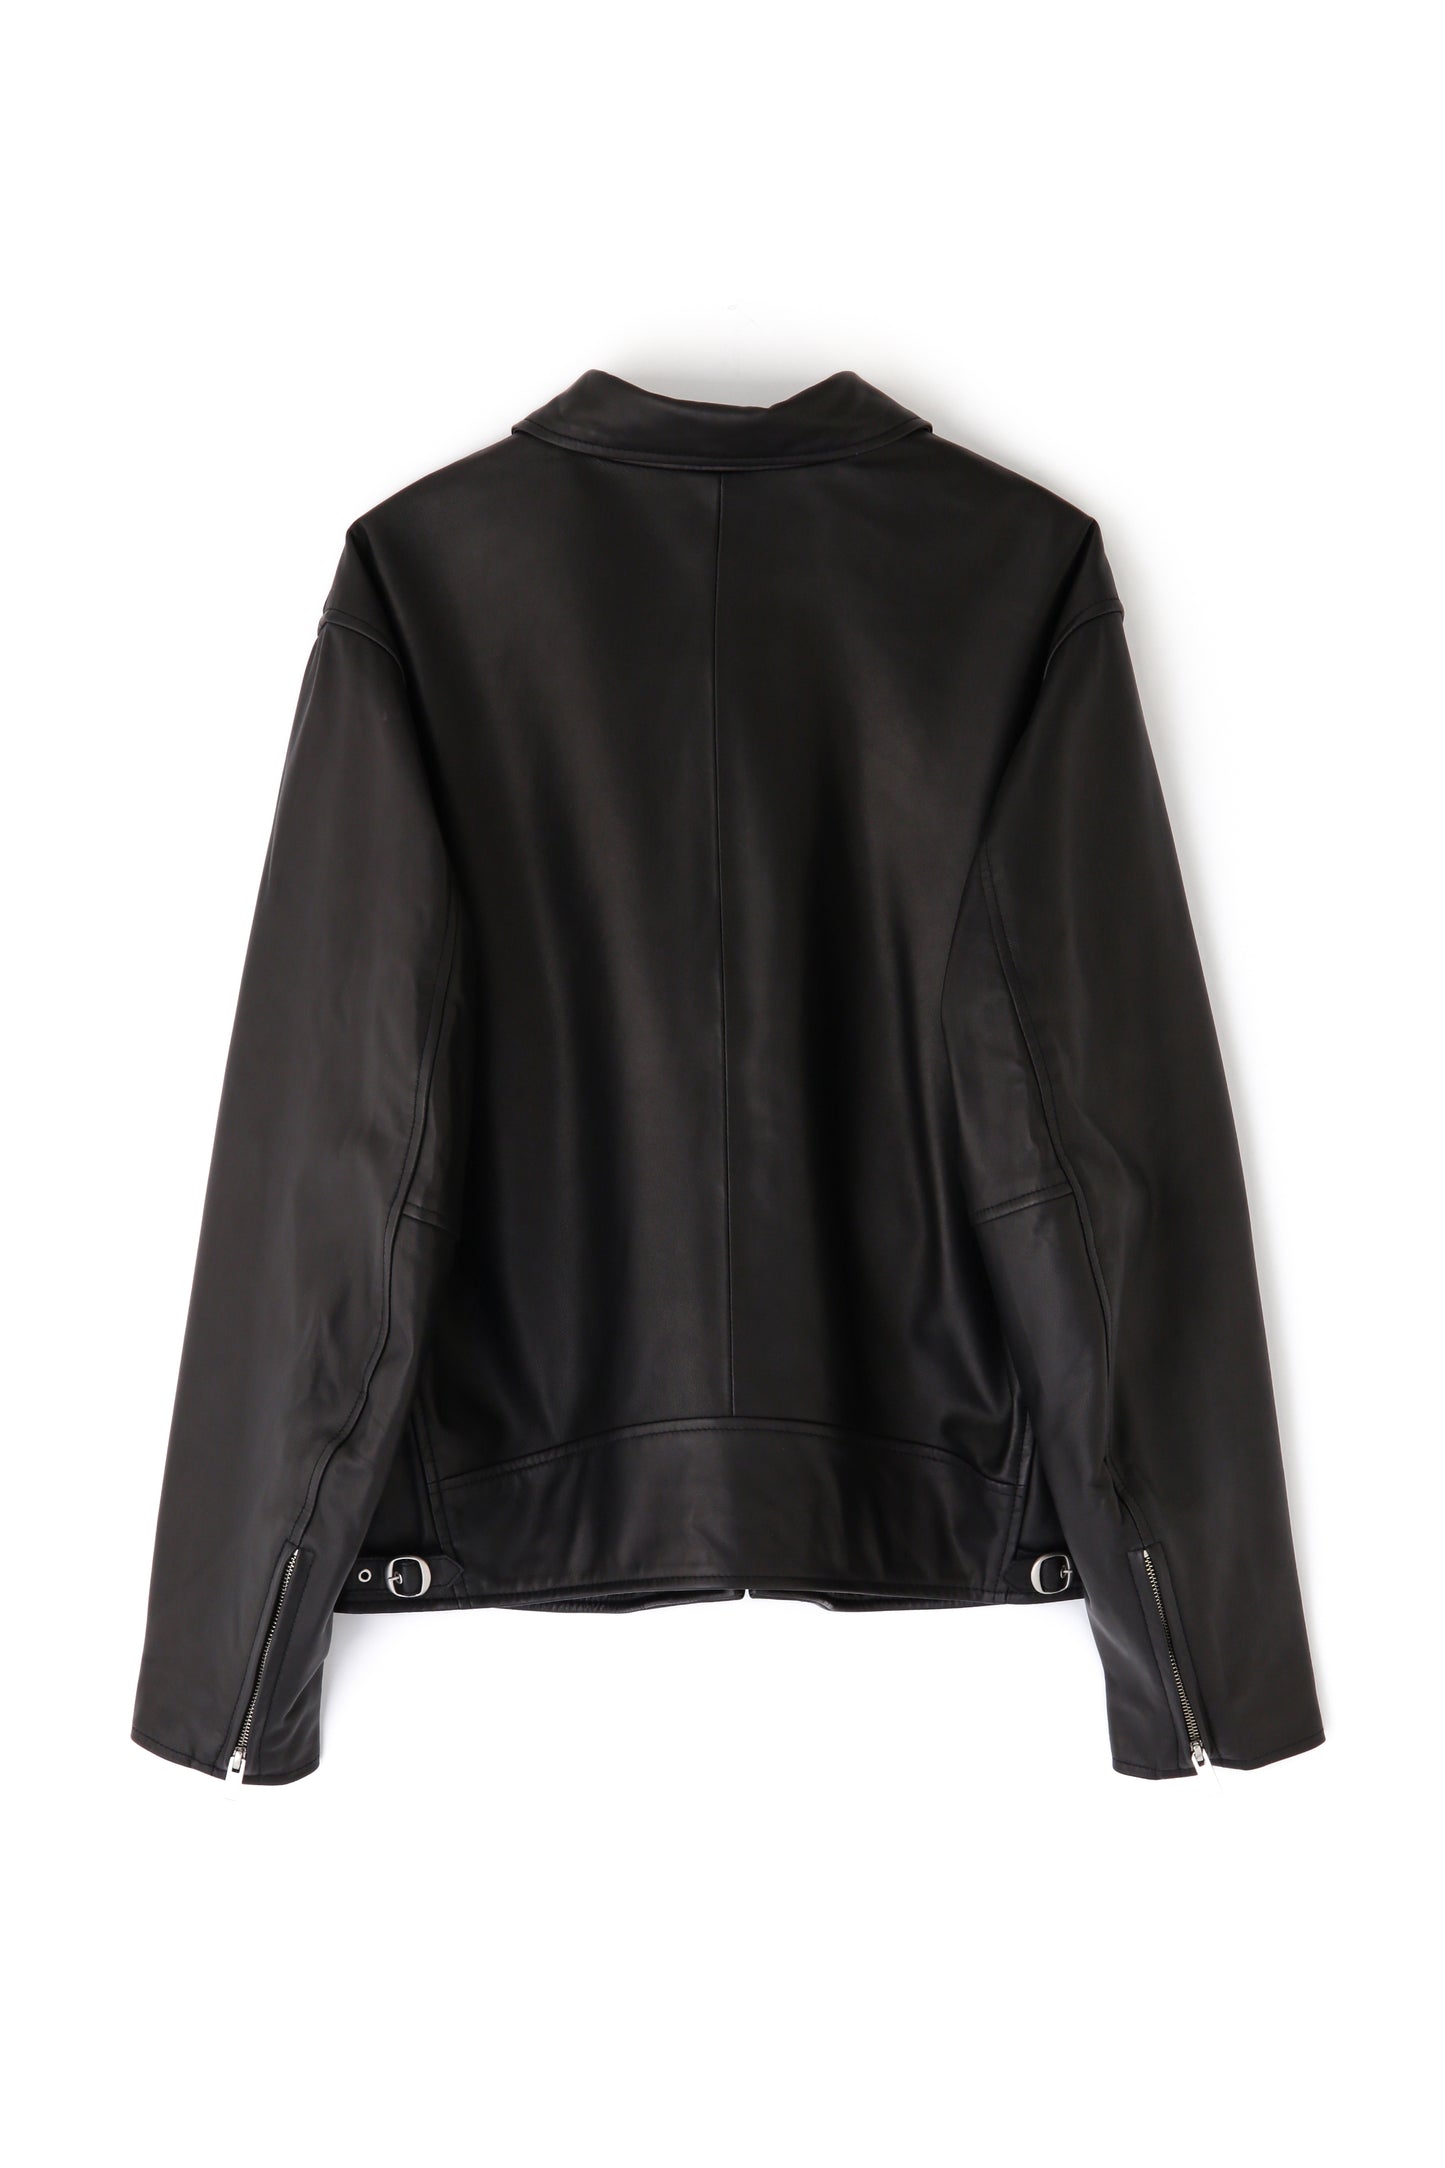 LEATHER RIDERS JACKET -Sheep leather-